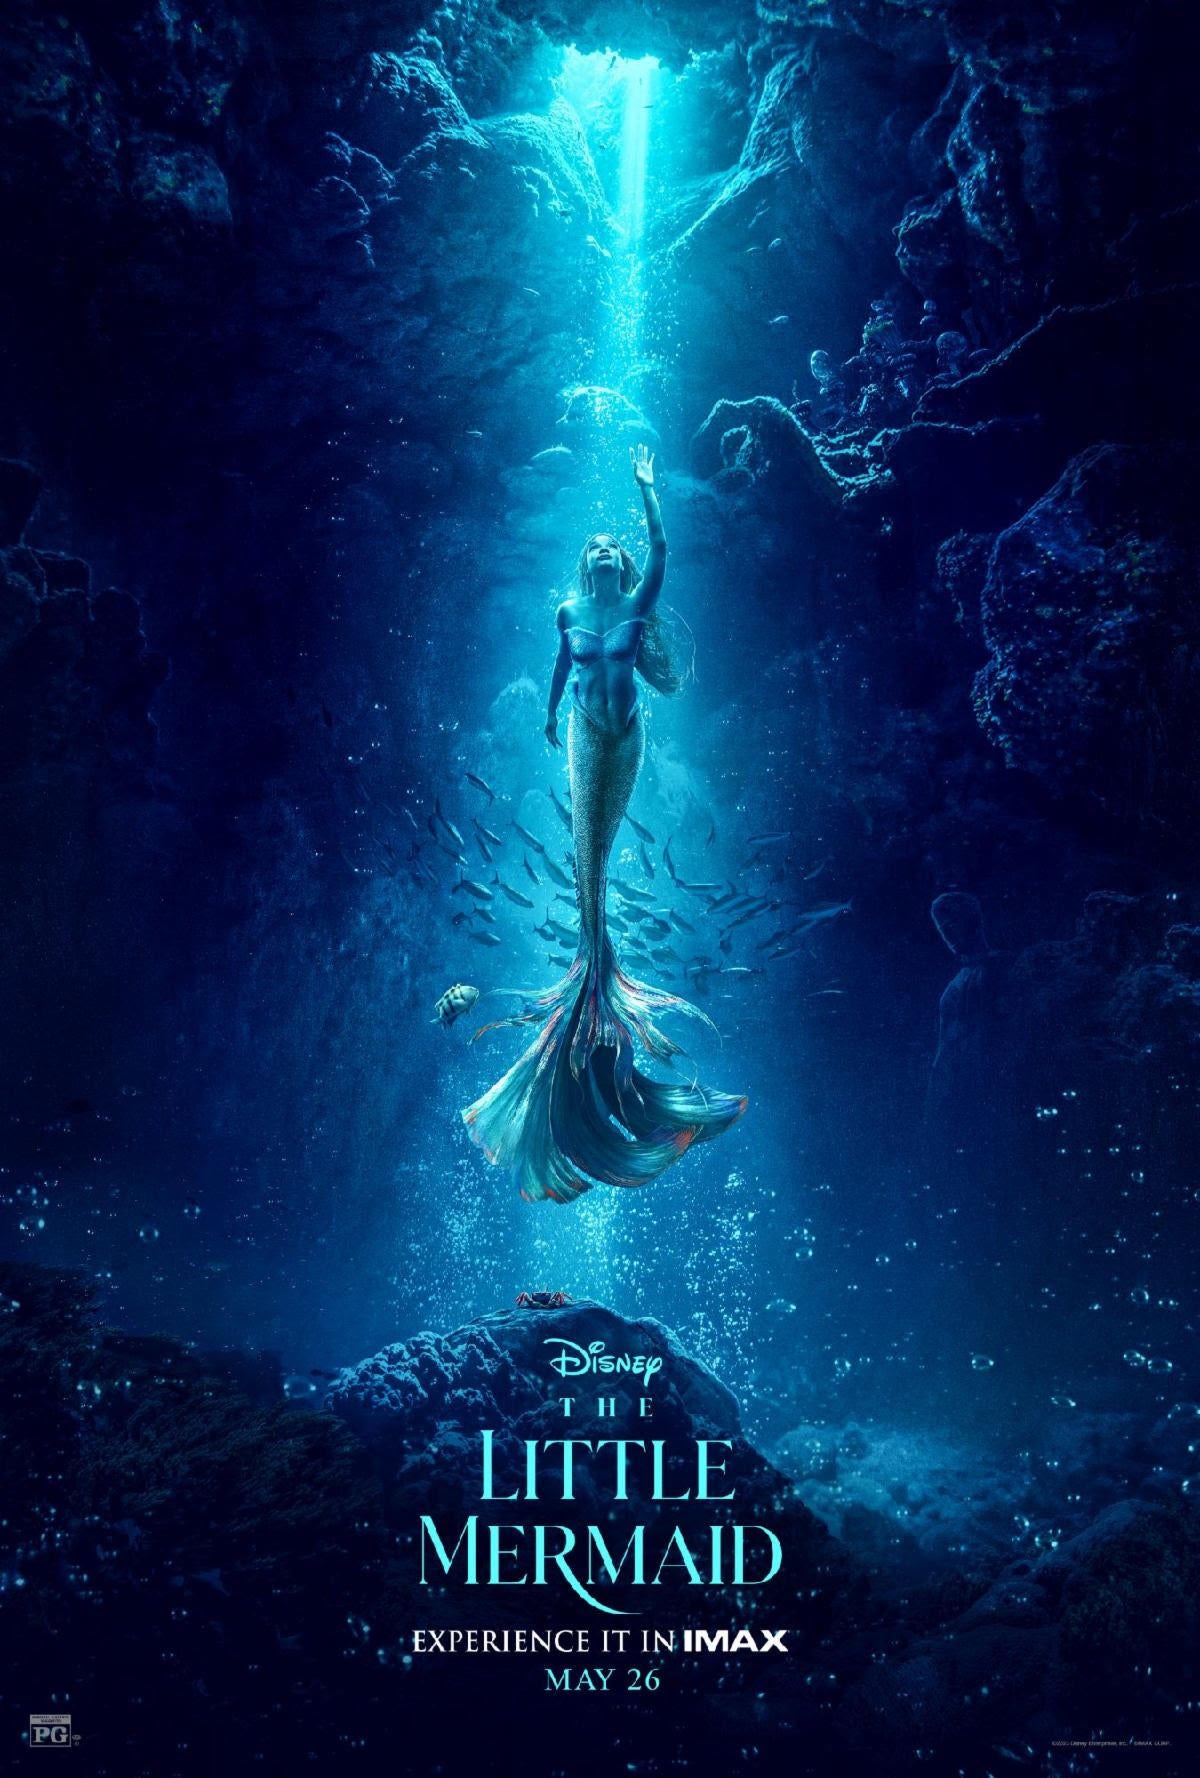 The Little Mermaid Tickets On Sale Now, IMAX Poster Revealed